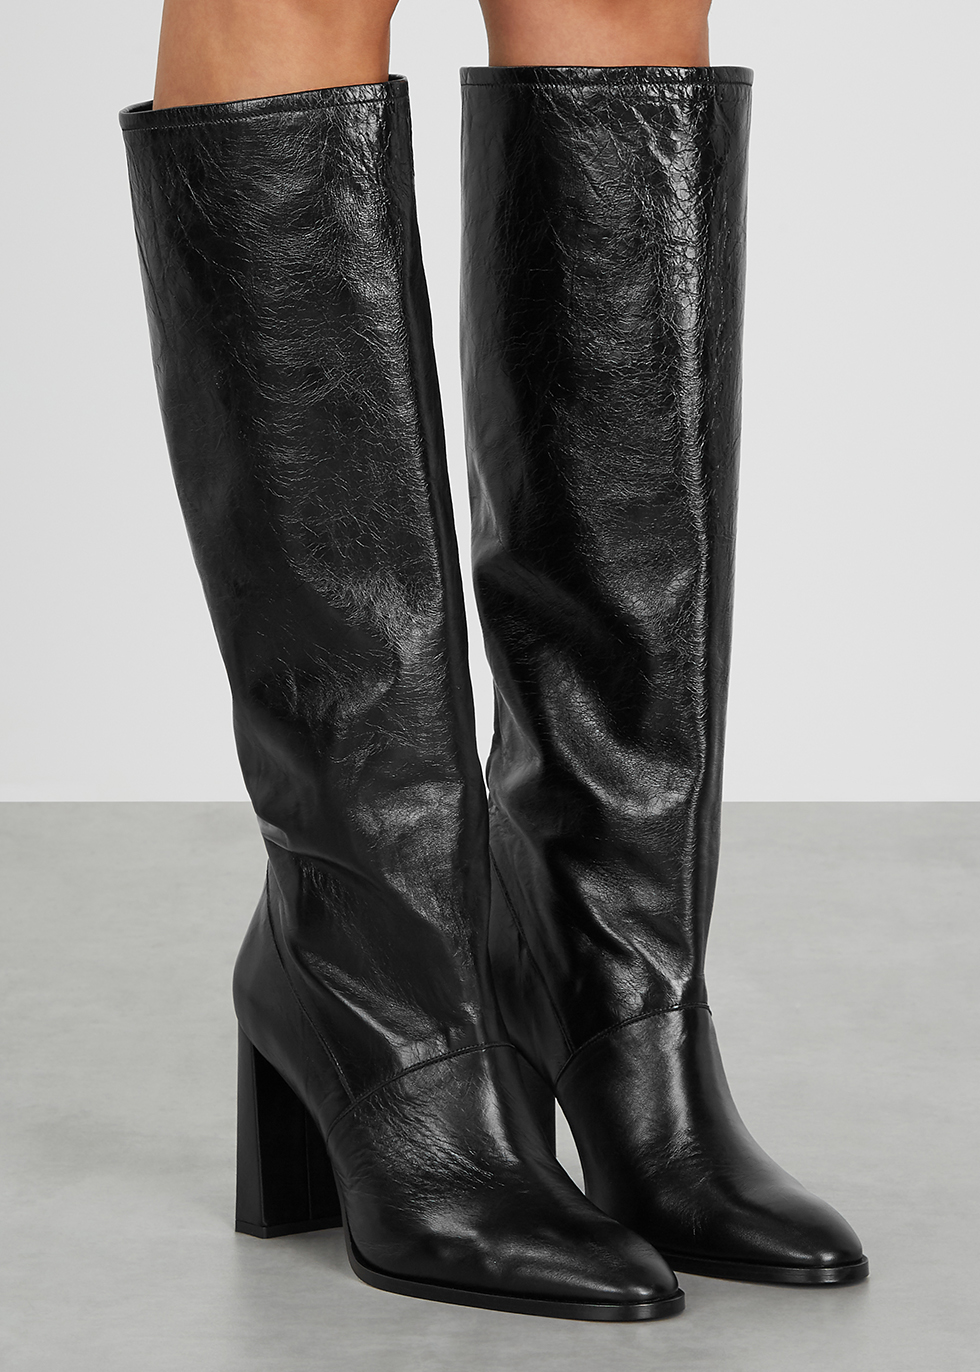 real leather knee high boots